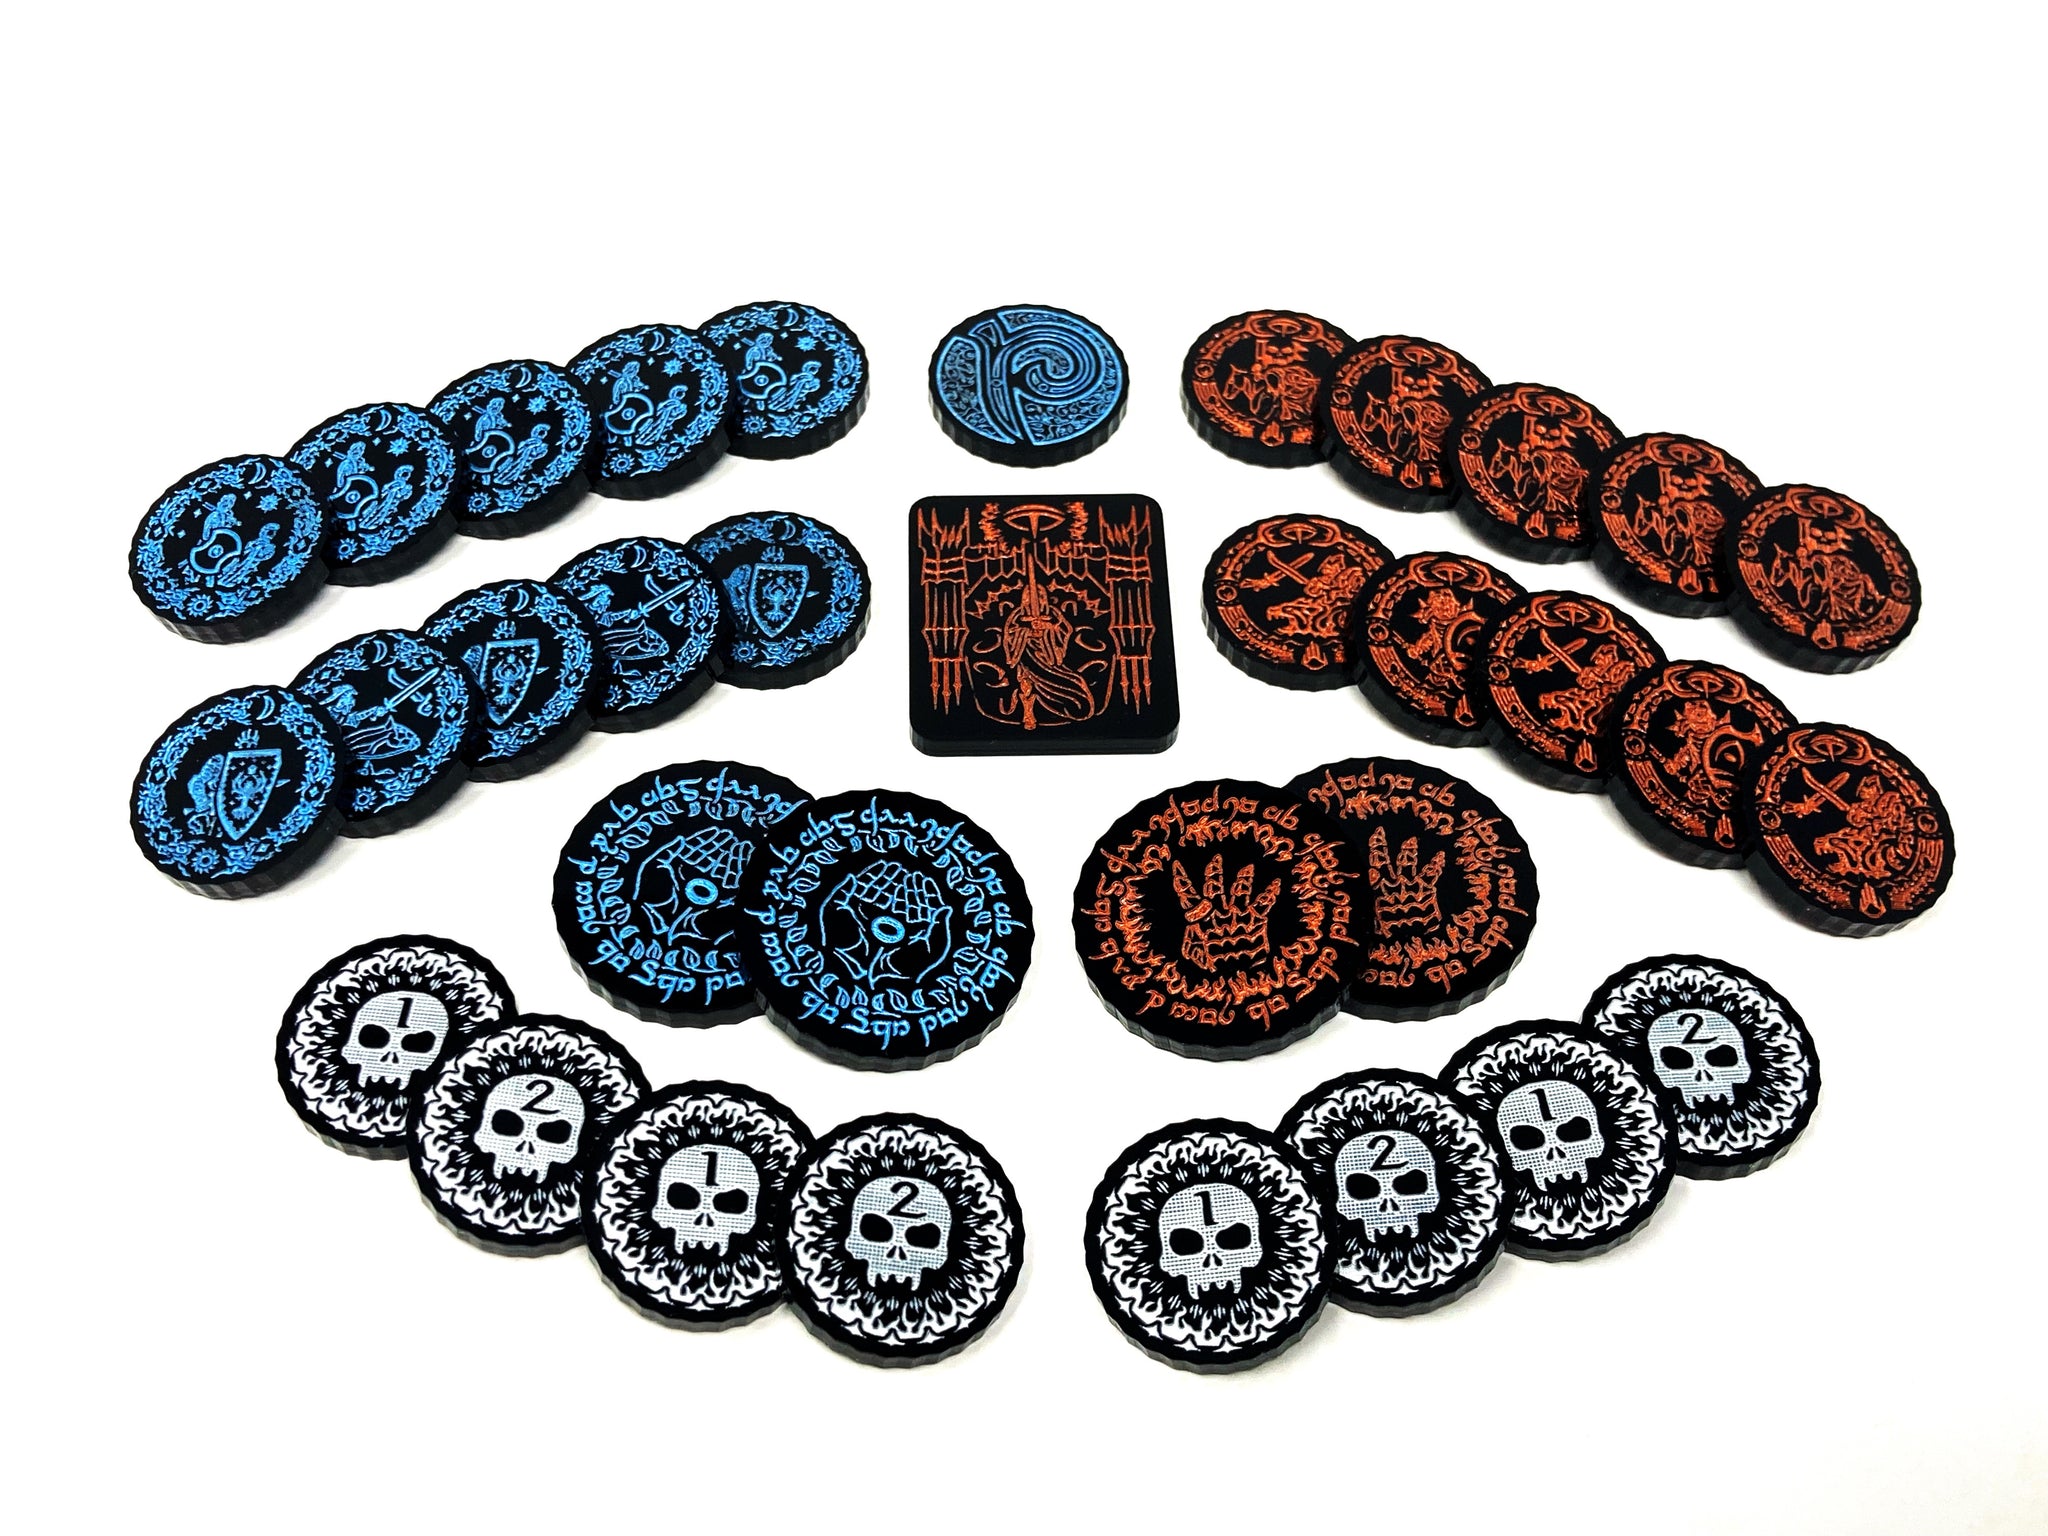 War of the Ring - The Card Game Token Set